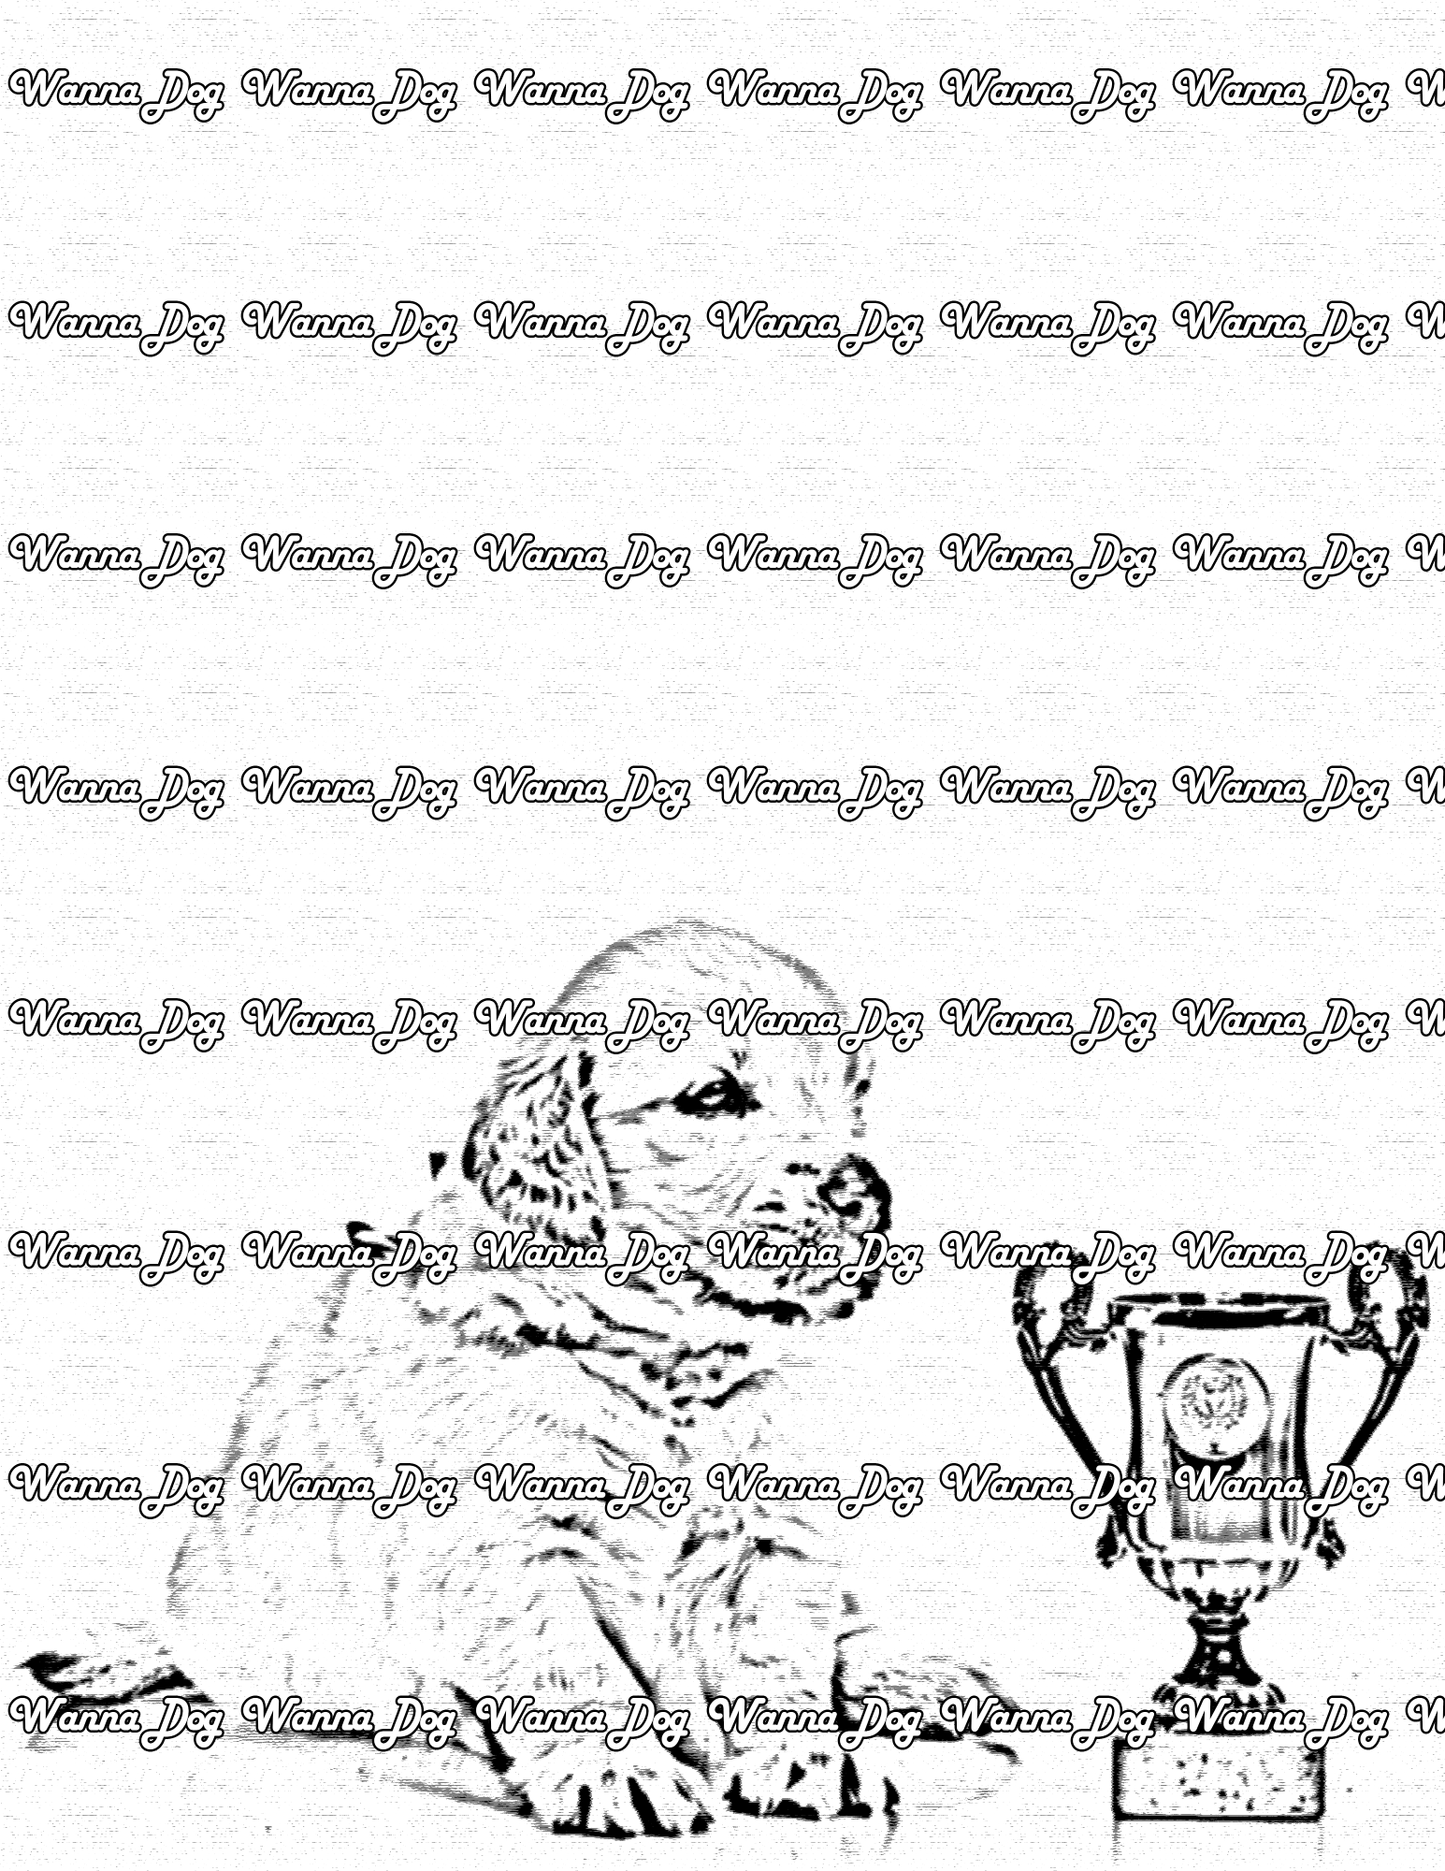 Golden Retriever Puppy Coloring Page of a Golden Retriever Puppy with a trophy